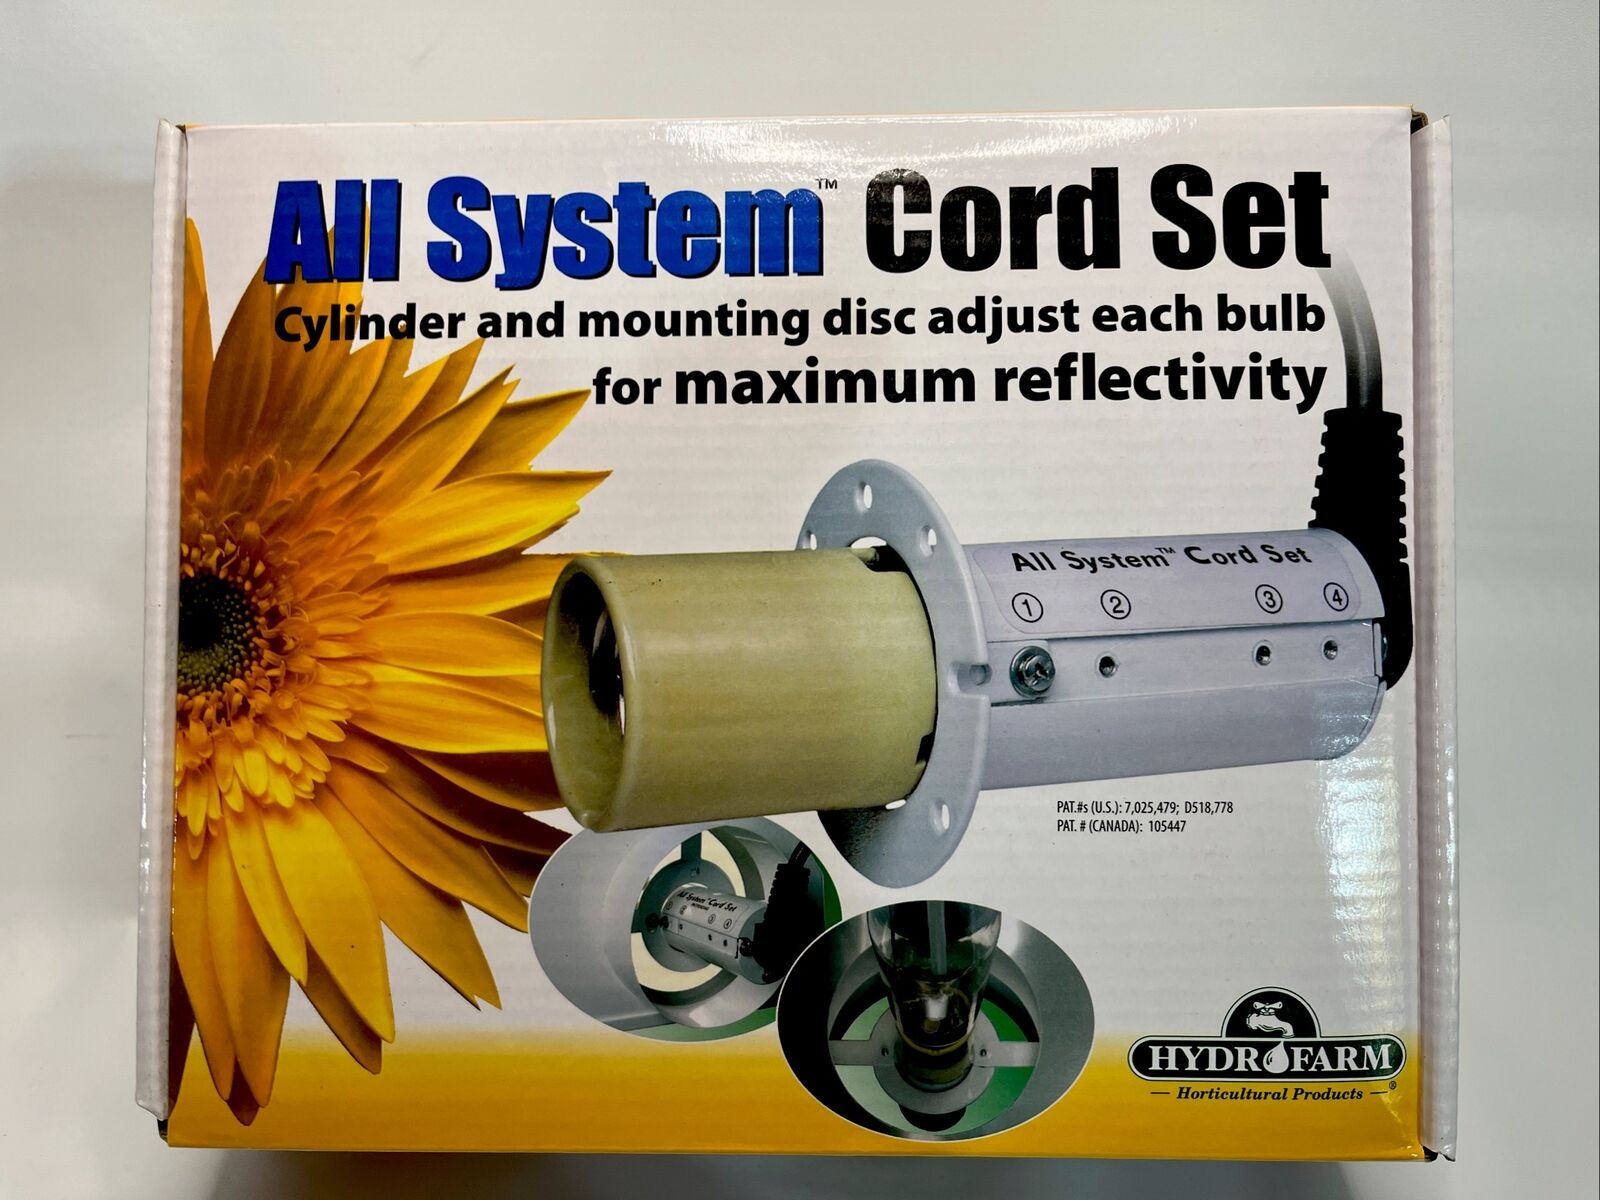 New  Hydrofarm ALL SYSTEM CORD SET with 15' Socket Grow Light Wing Reflector